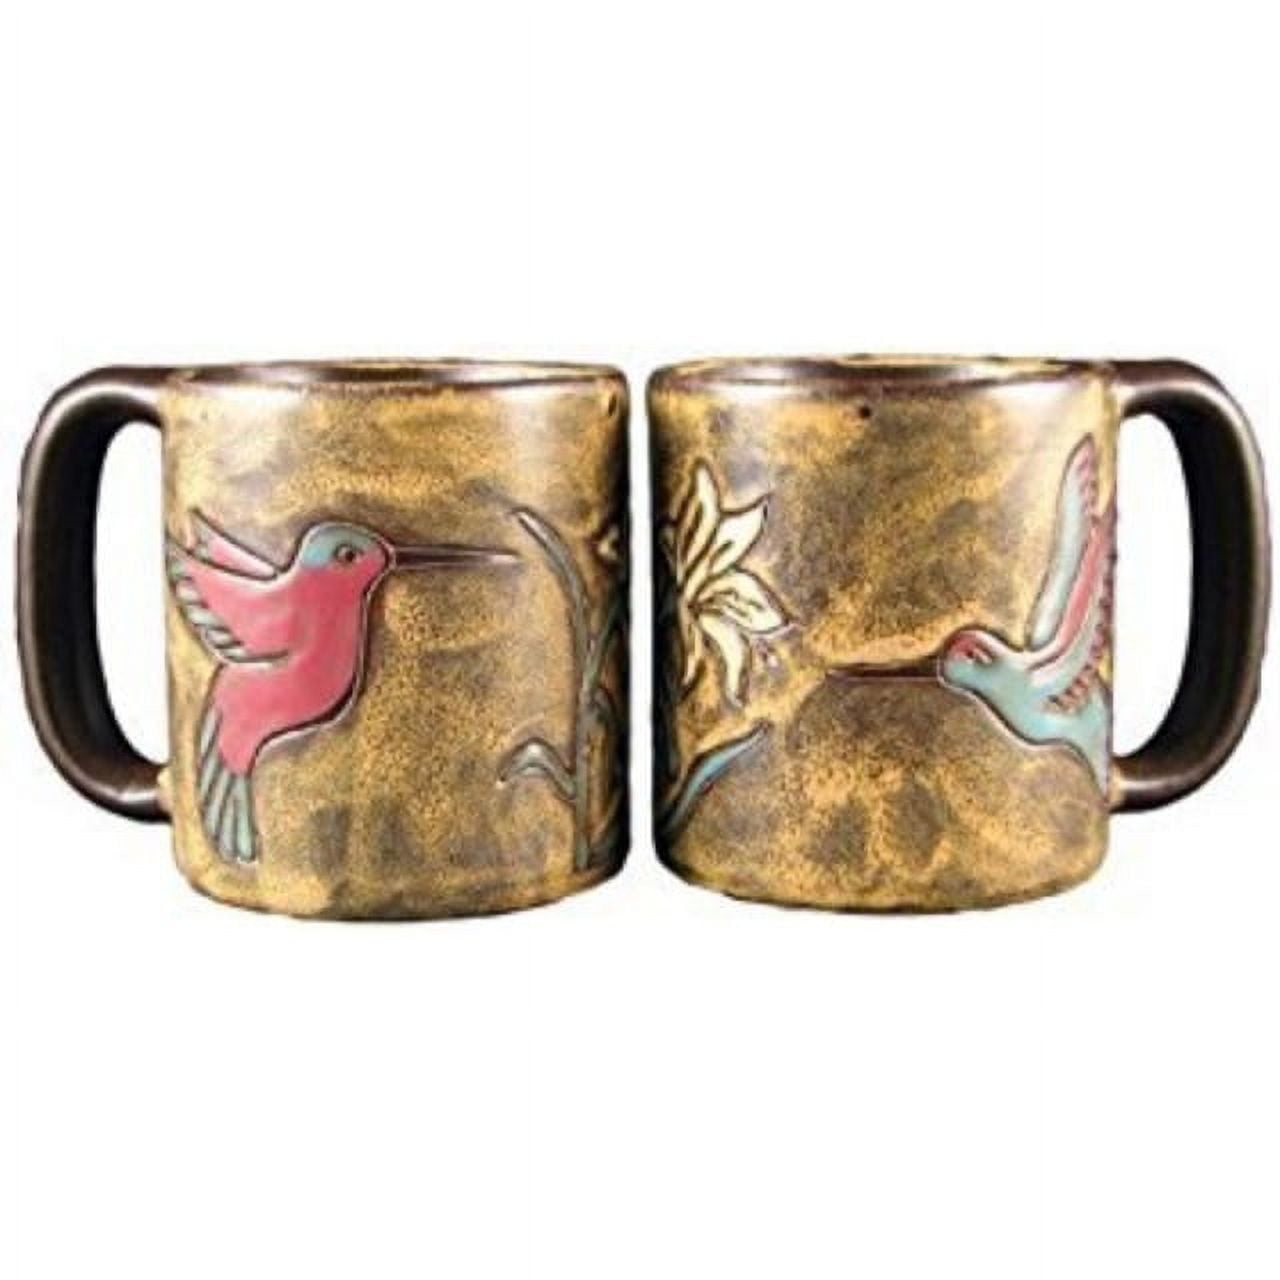 Ceramic Mira Coffee Mug with Floral Designs, Fancy Mugs for Tea,  Cappuccinos, and more, Unique Gift …See more Ceramic Mira Coffee Mug with  Floral